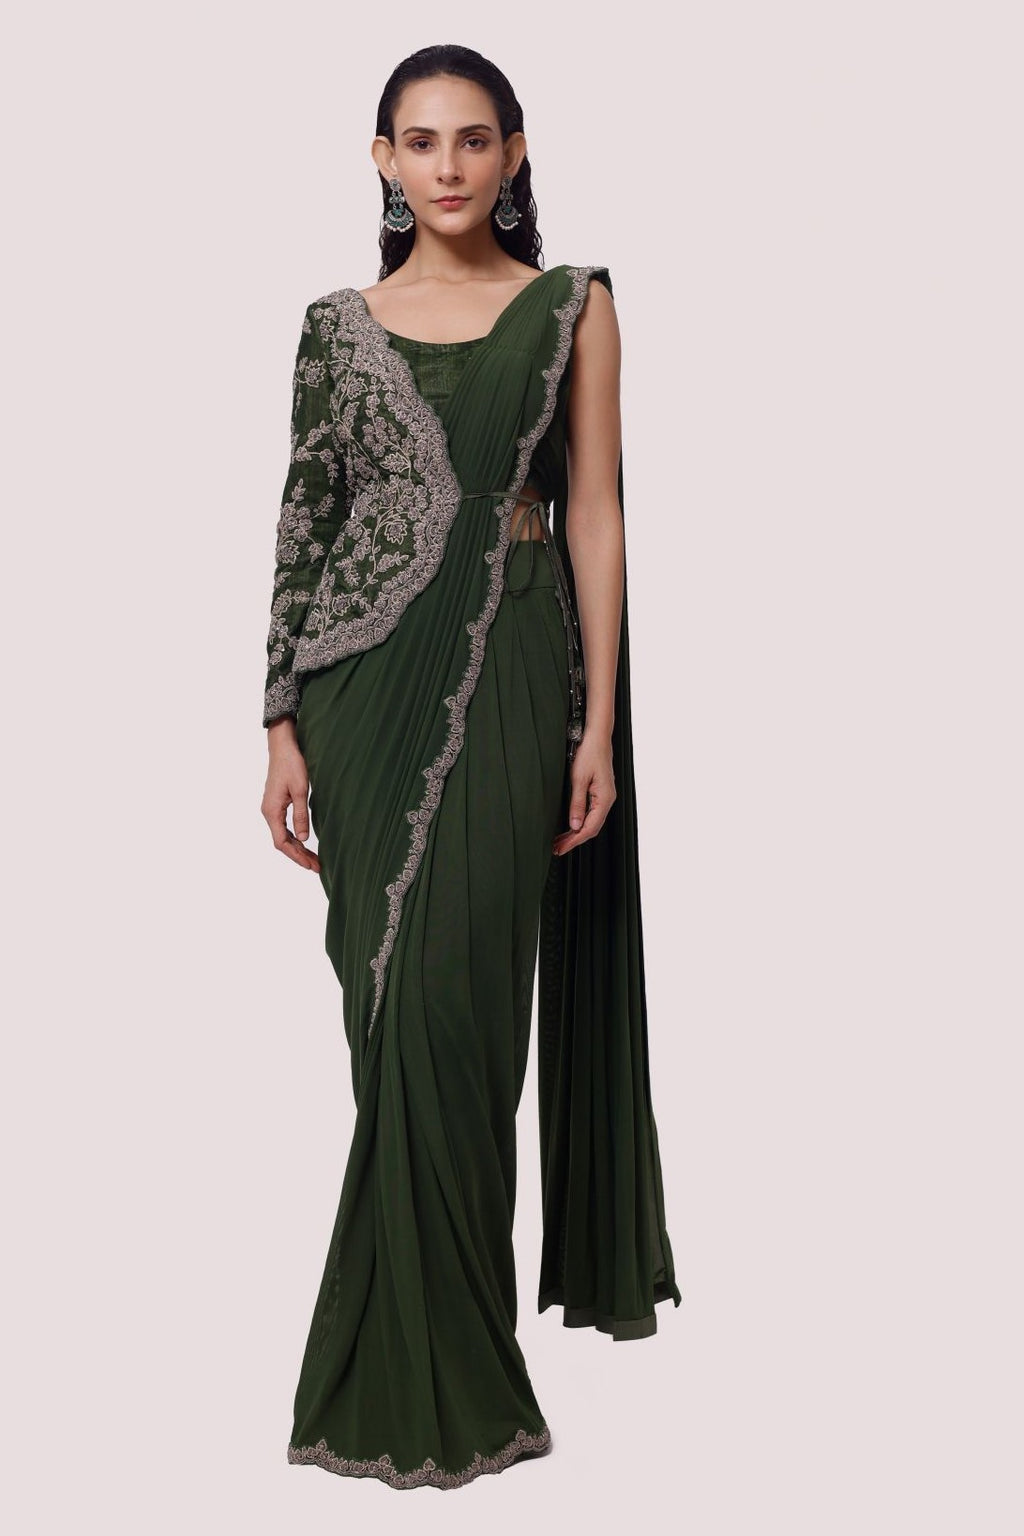 Shop the olive green zardozi work saree with a designer blouse. Make a fashion statement on festive occasions and weddings with designer sarees, designer suits, Indian dresses, Anarkali suits, palazzo suits, designer gowns, sharara suits, and embroidered sarees from Pure Elegance Indian fashion store in the USA.